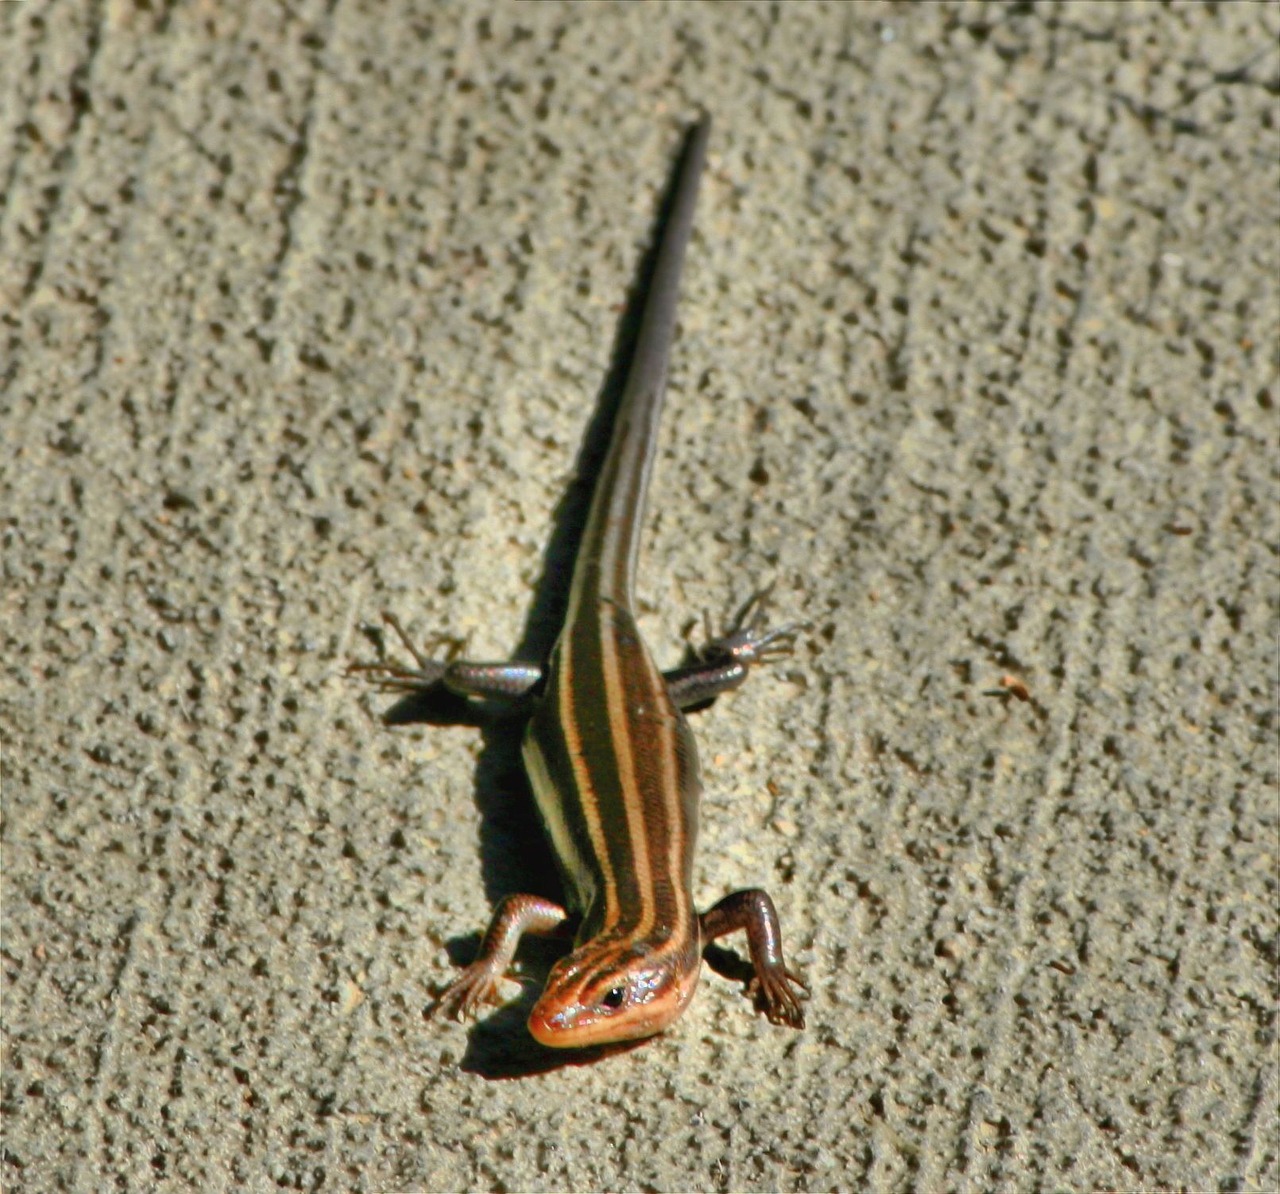 brown tailed skink copper striped lizard free photo